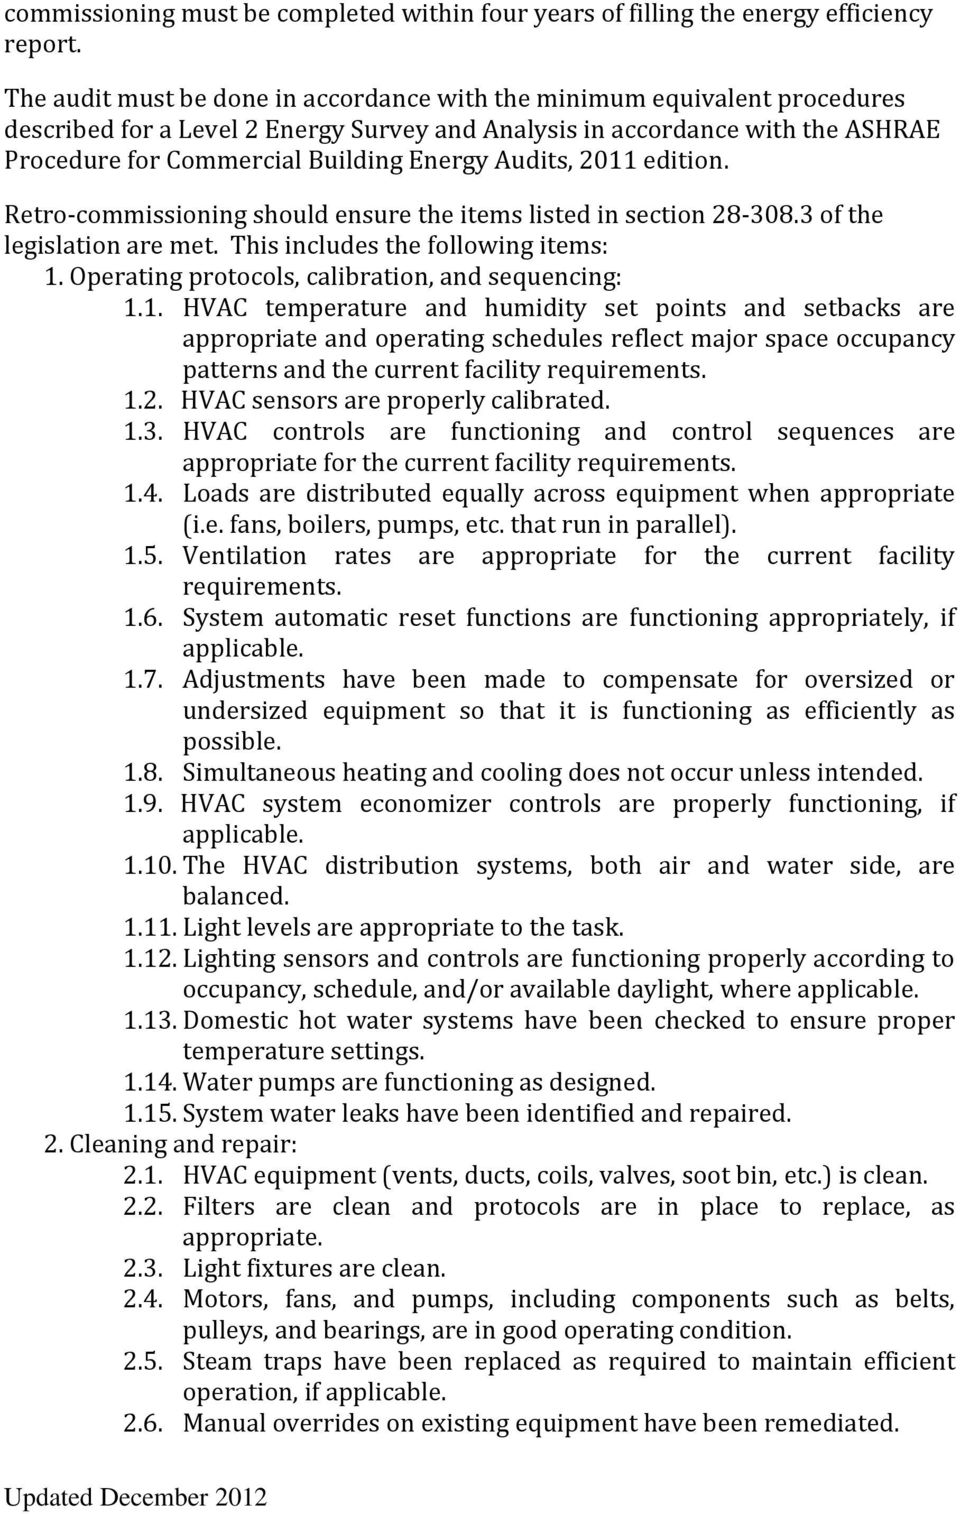 Audits, 2011 edition. Retro-commissioning should ensure the items listed in section 28-308.3 of the legislation are met. This includes the following items: 1.